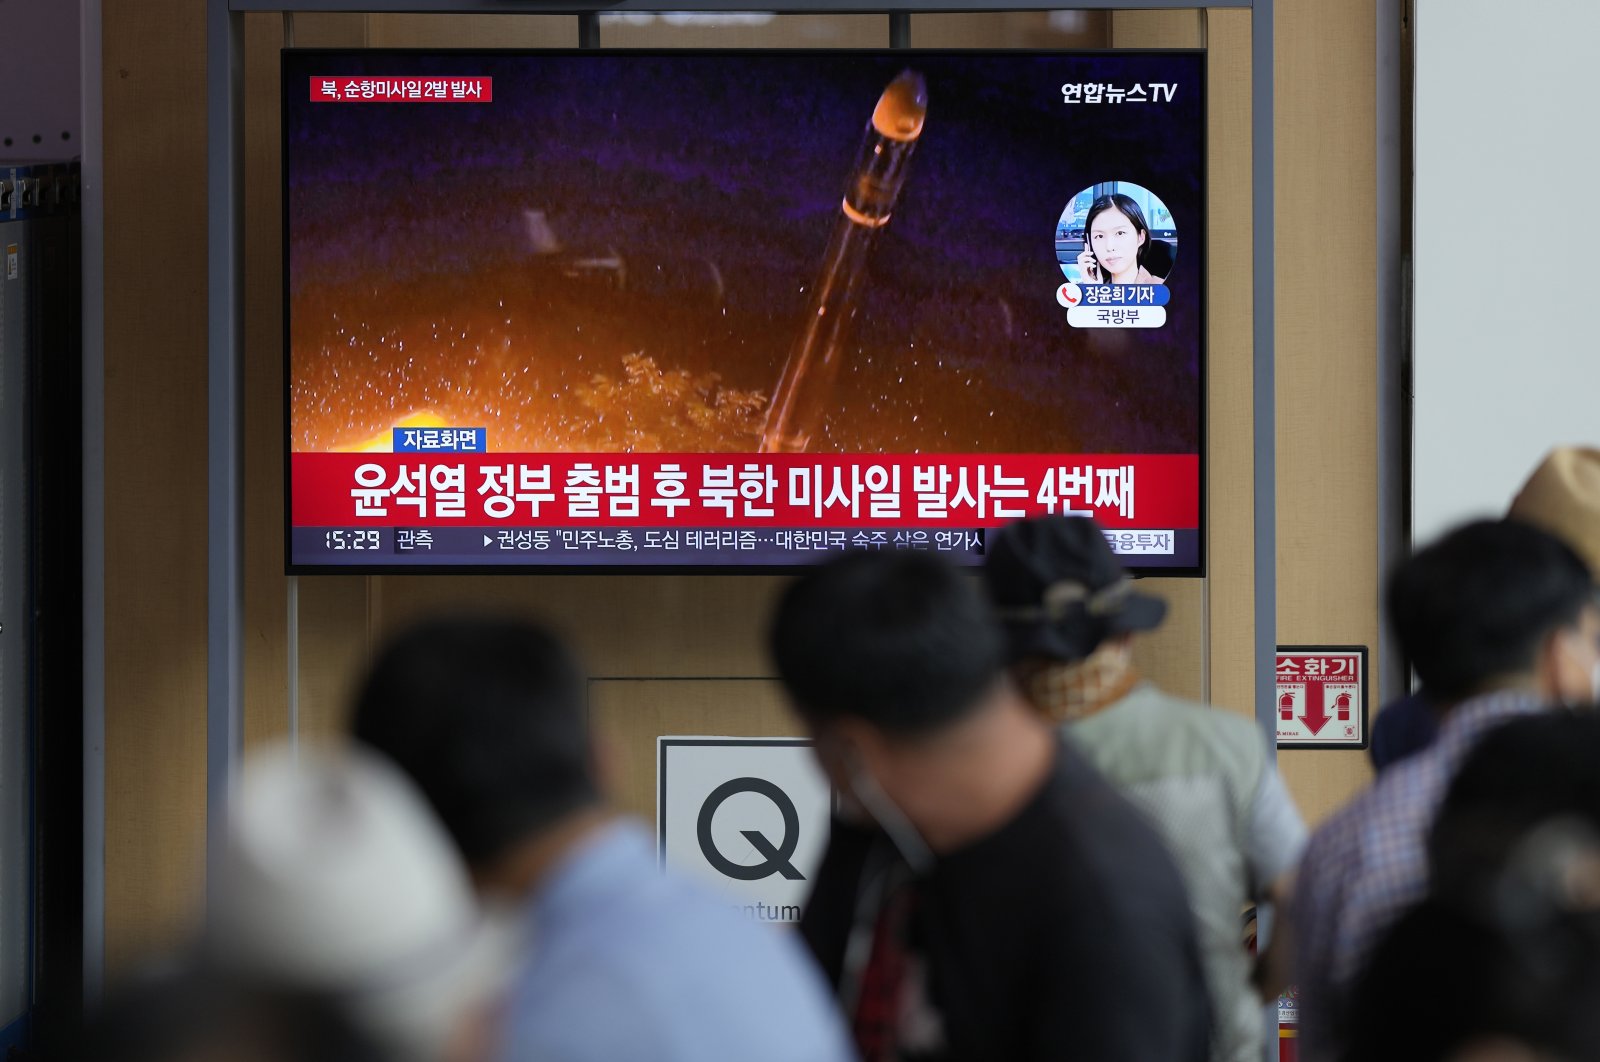 A TV screen showing a news program reporting on North Korea&#039;s missile launch is seen at the Seoul Railway Station in Seoul, South Korea, Aug. 17, 2022. (AP Photo)